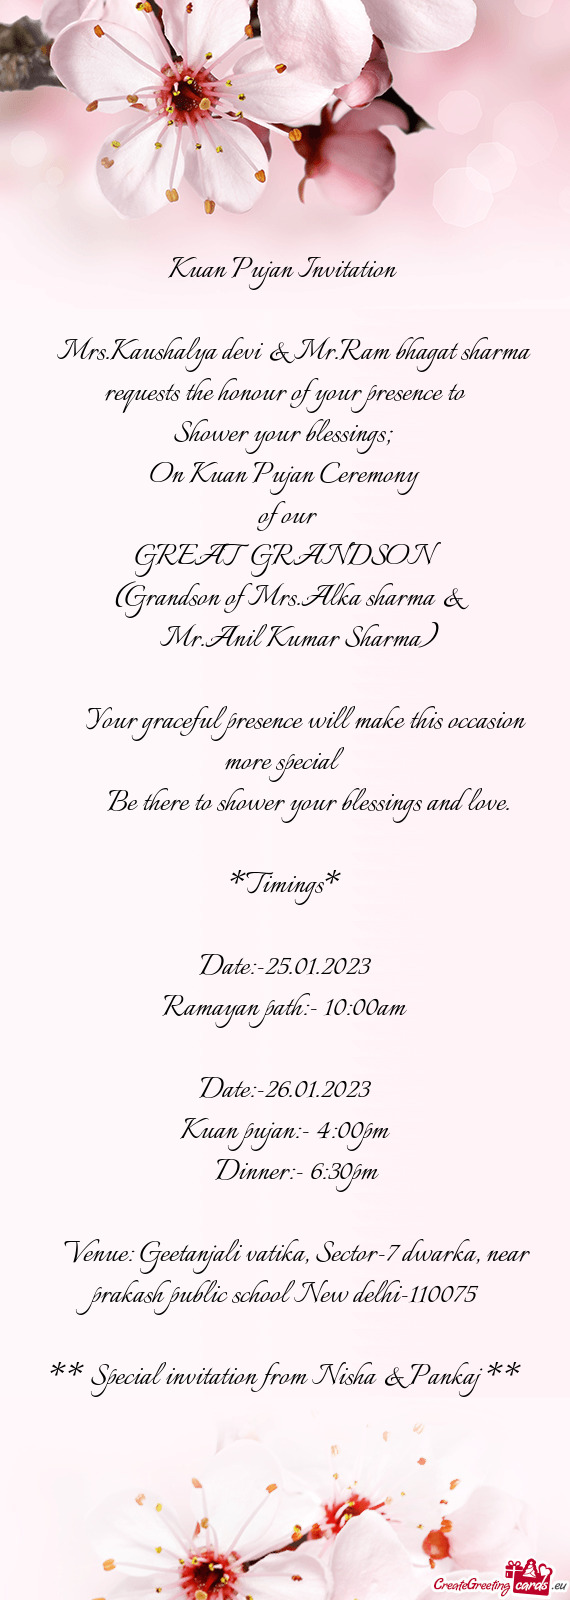 Mrs.Kaushalya devi & Mr.Ram bhagat sharma requests the honour of your presence to